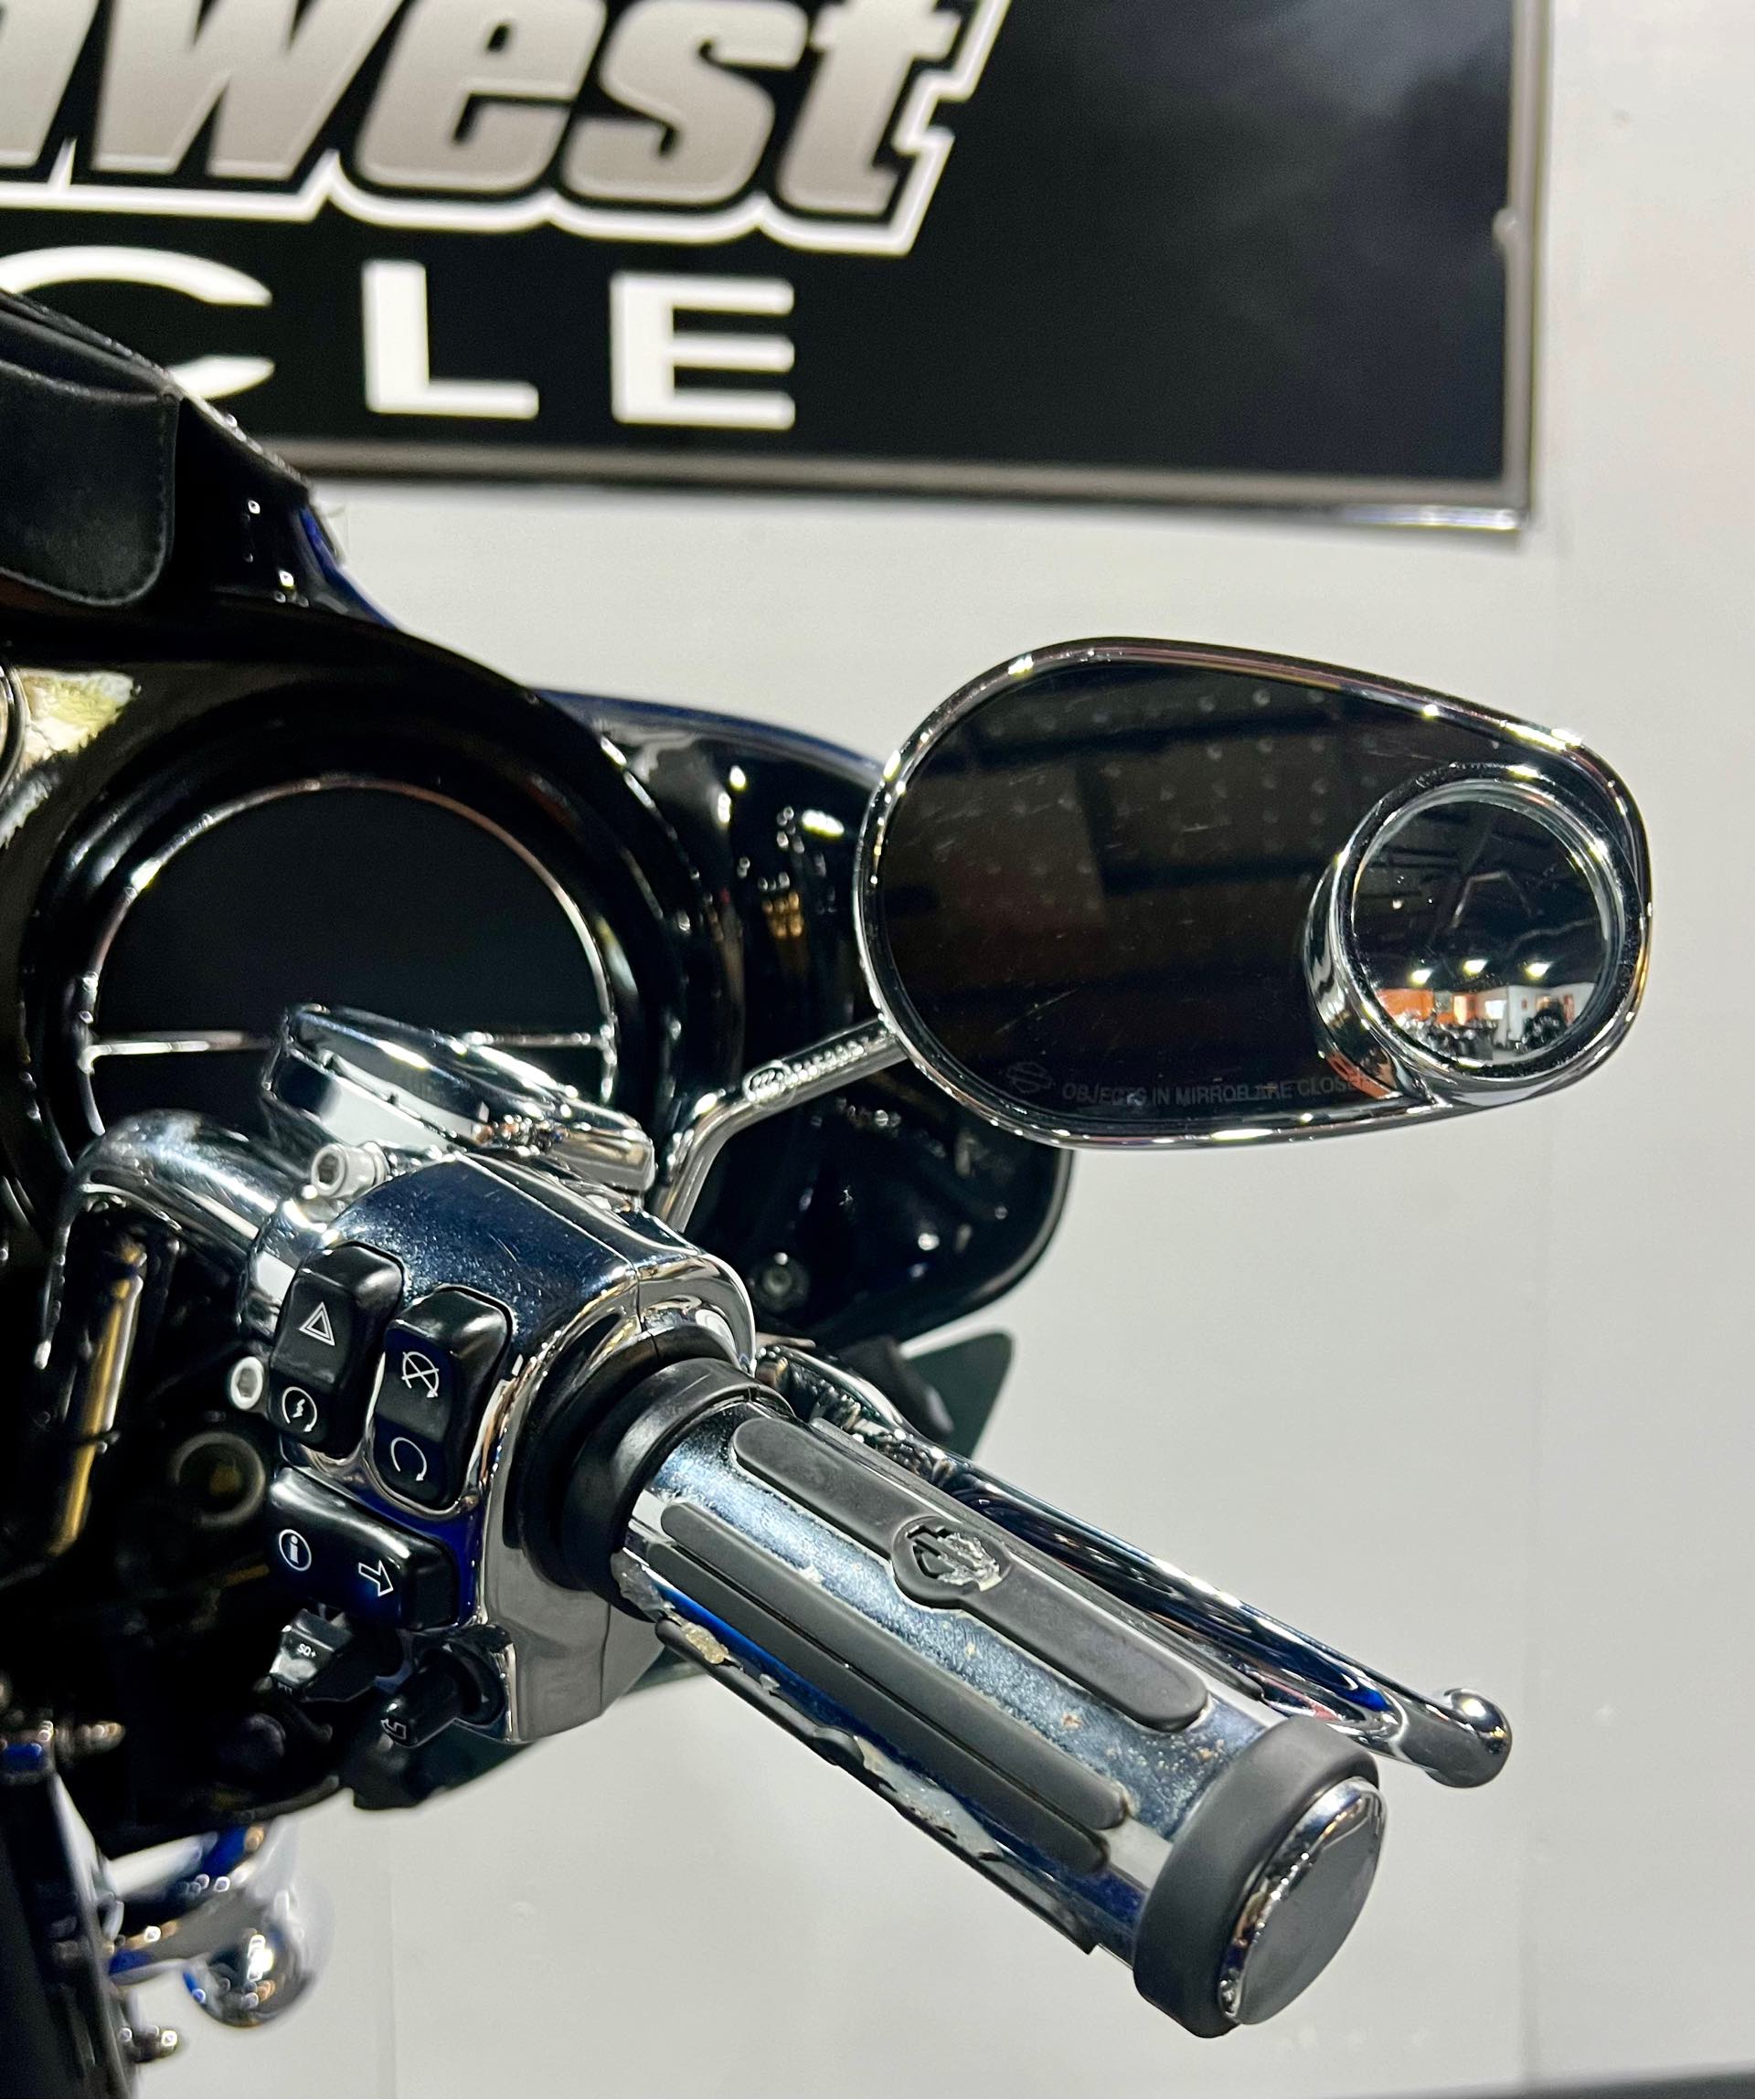 2015 Harley-Davidson Electra Glide Ultra Limited Low at Southwest Cycle, Cape Coral, FL 33909